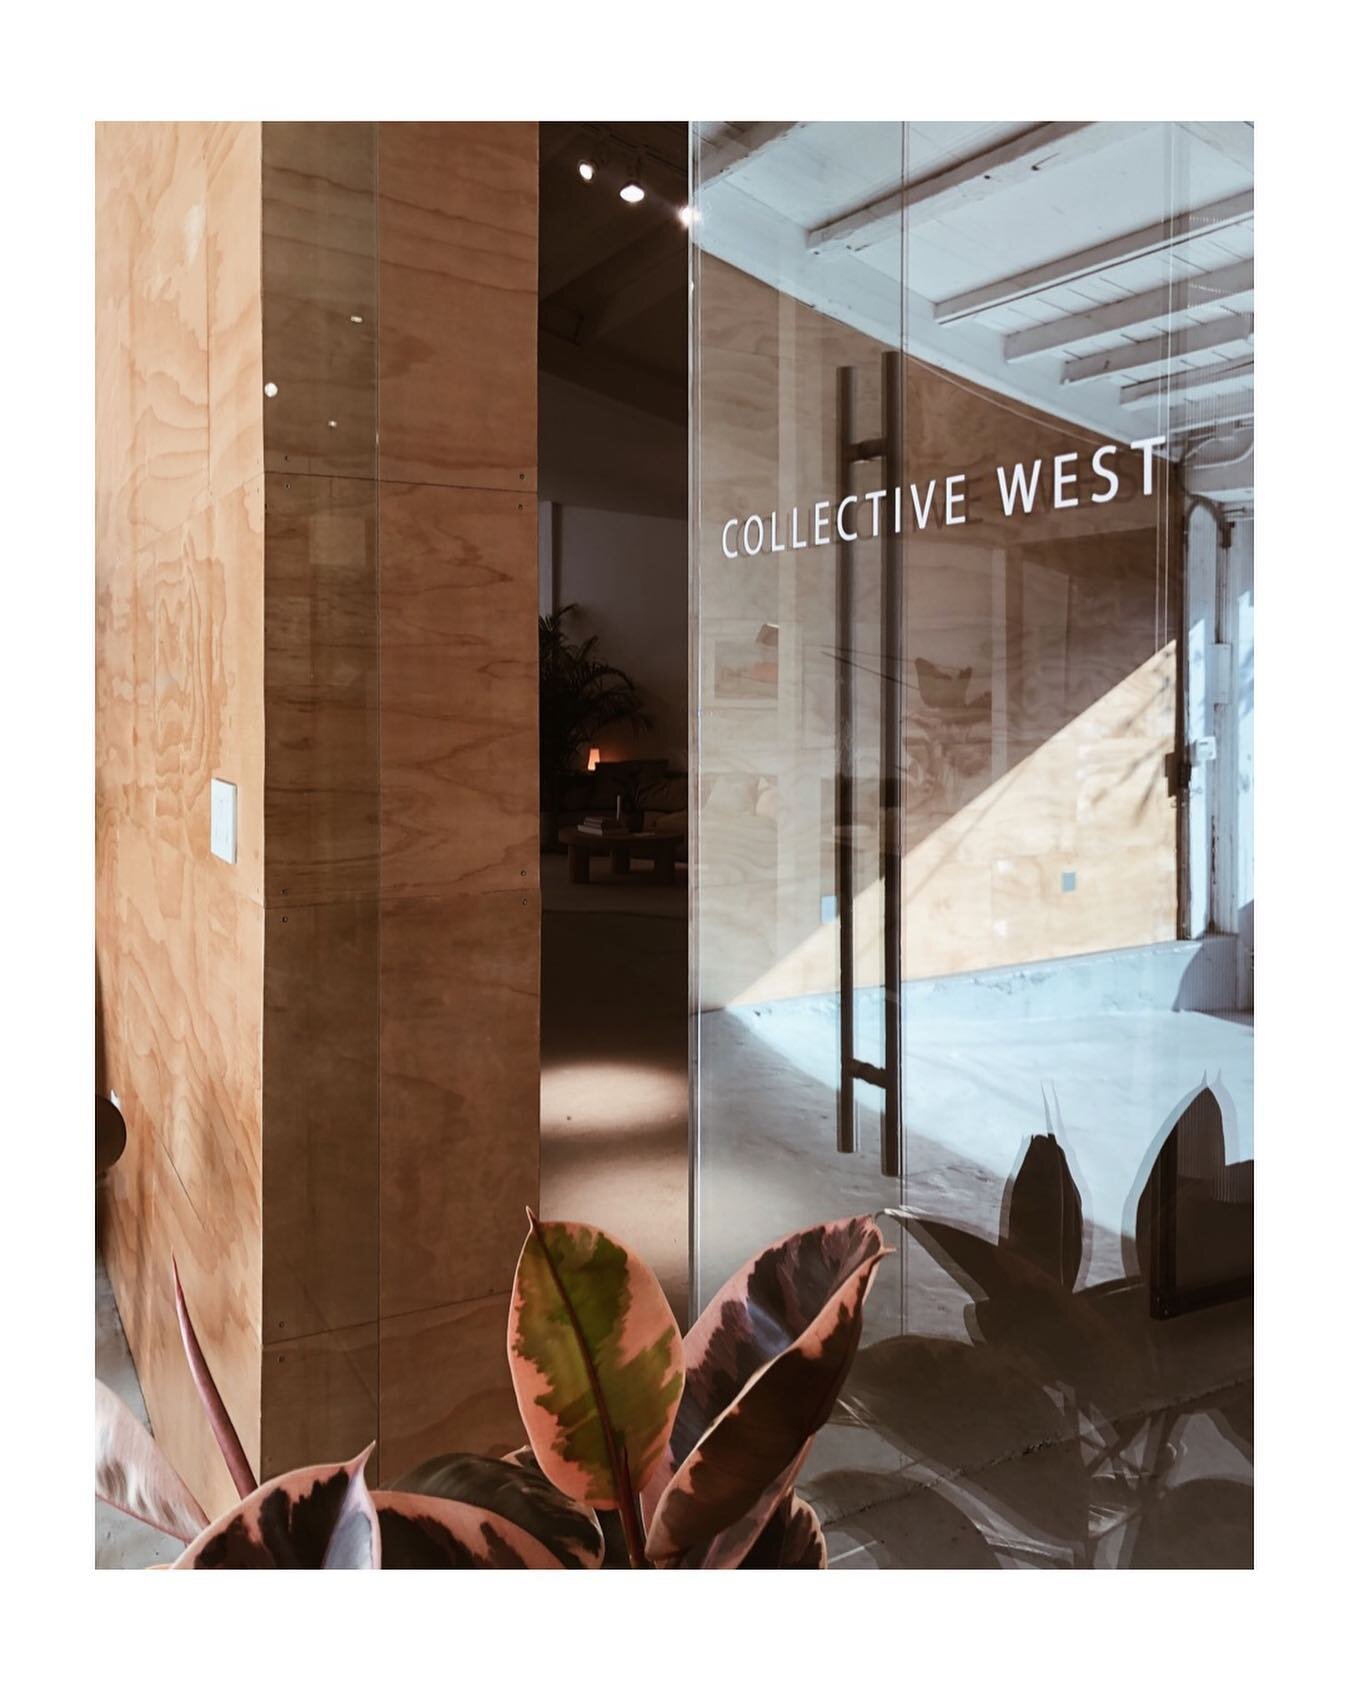 Collective West doors are open ❤️